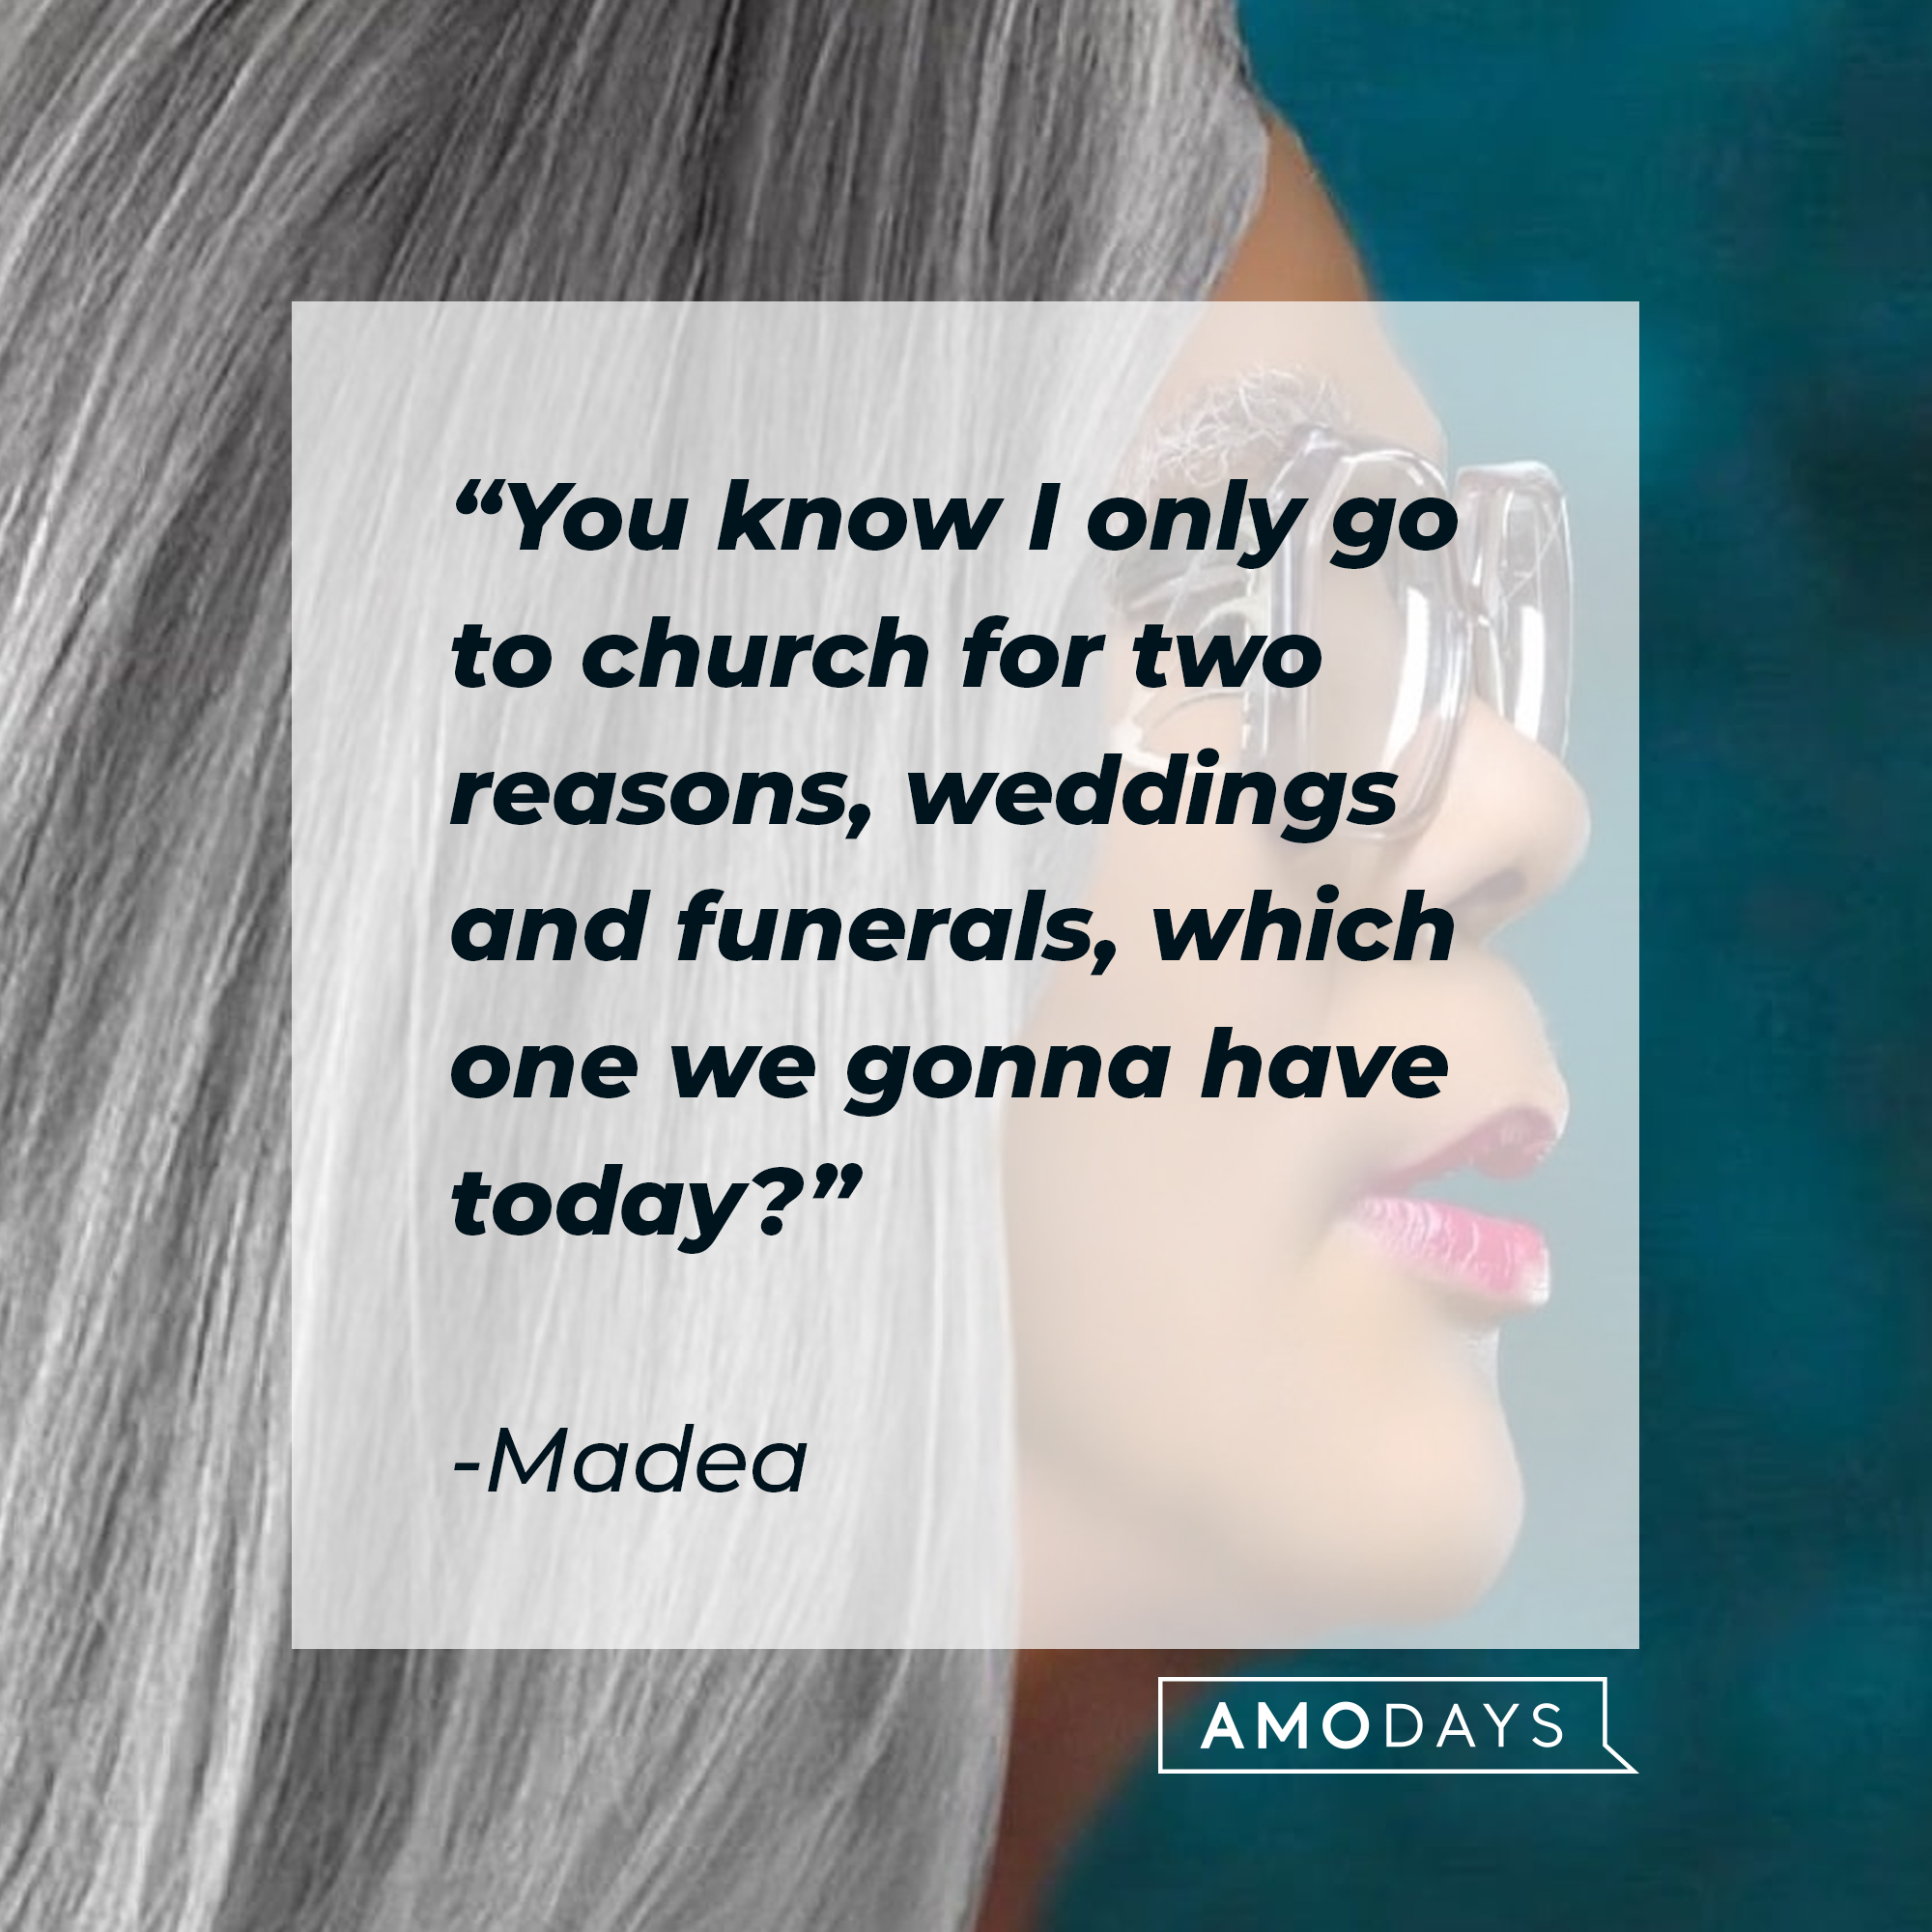 Madea's quote: "You know I only go to church for two reasons, weddings and funerals, which one we gonna have today?" | Source: Facebook.com/madea